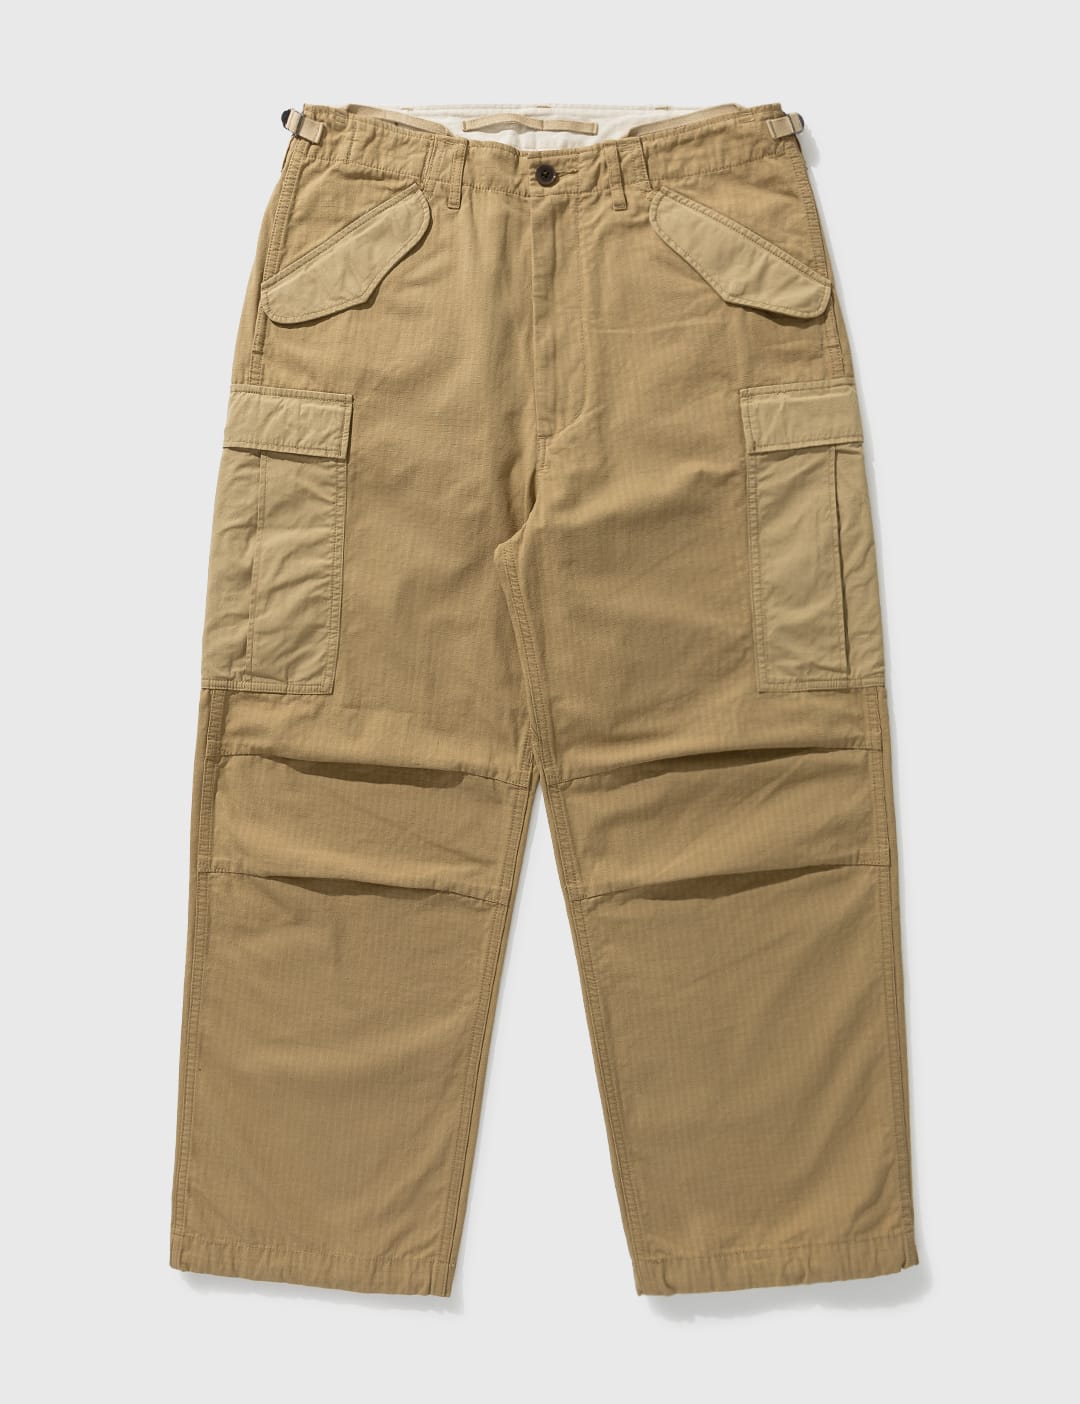 Nanamica - Cargo Pants | HBX - Globally Curated Fashion and